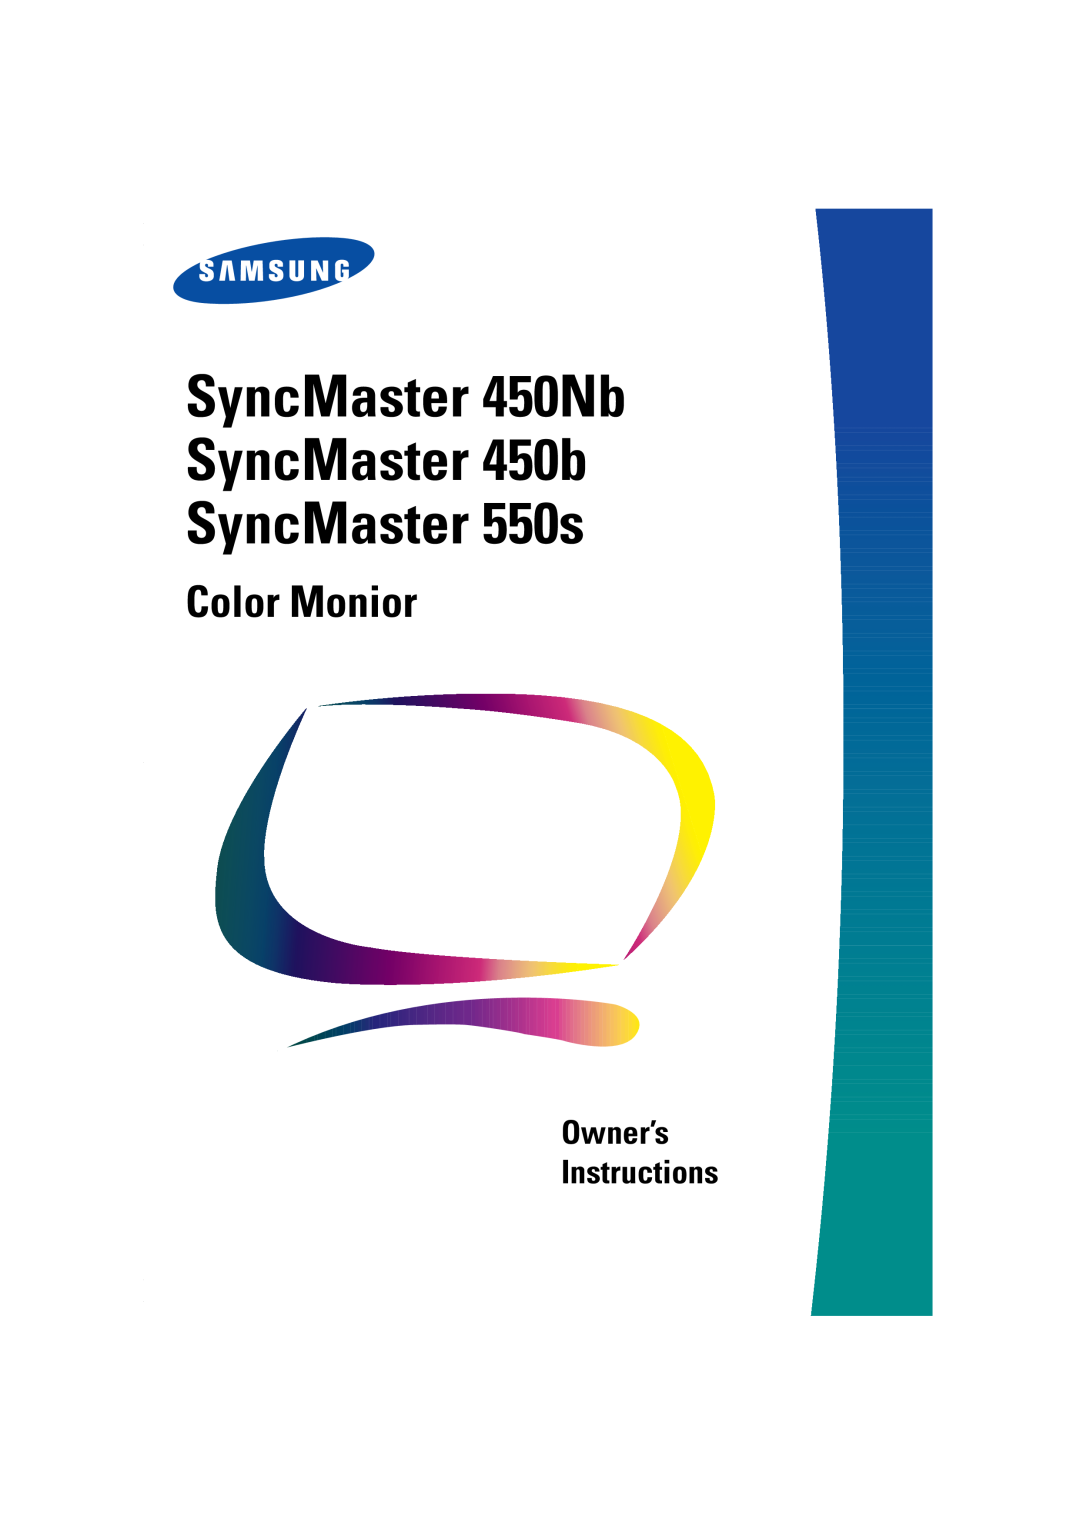 Samsung 450Nb, 450b, 550s manual SyncMaster 450Nb SyncMaster 450b SyncMaster 550s, Color Monior, Owner’s Instructions 